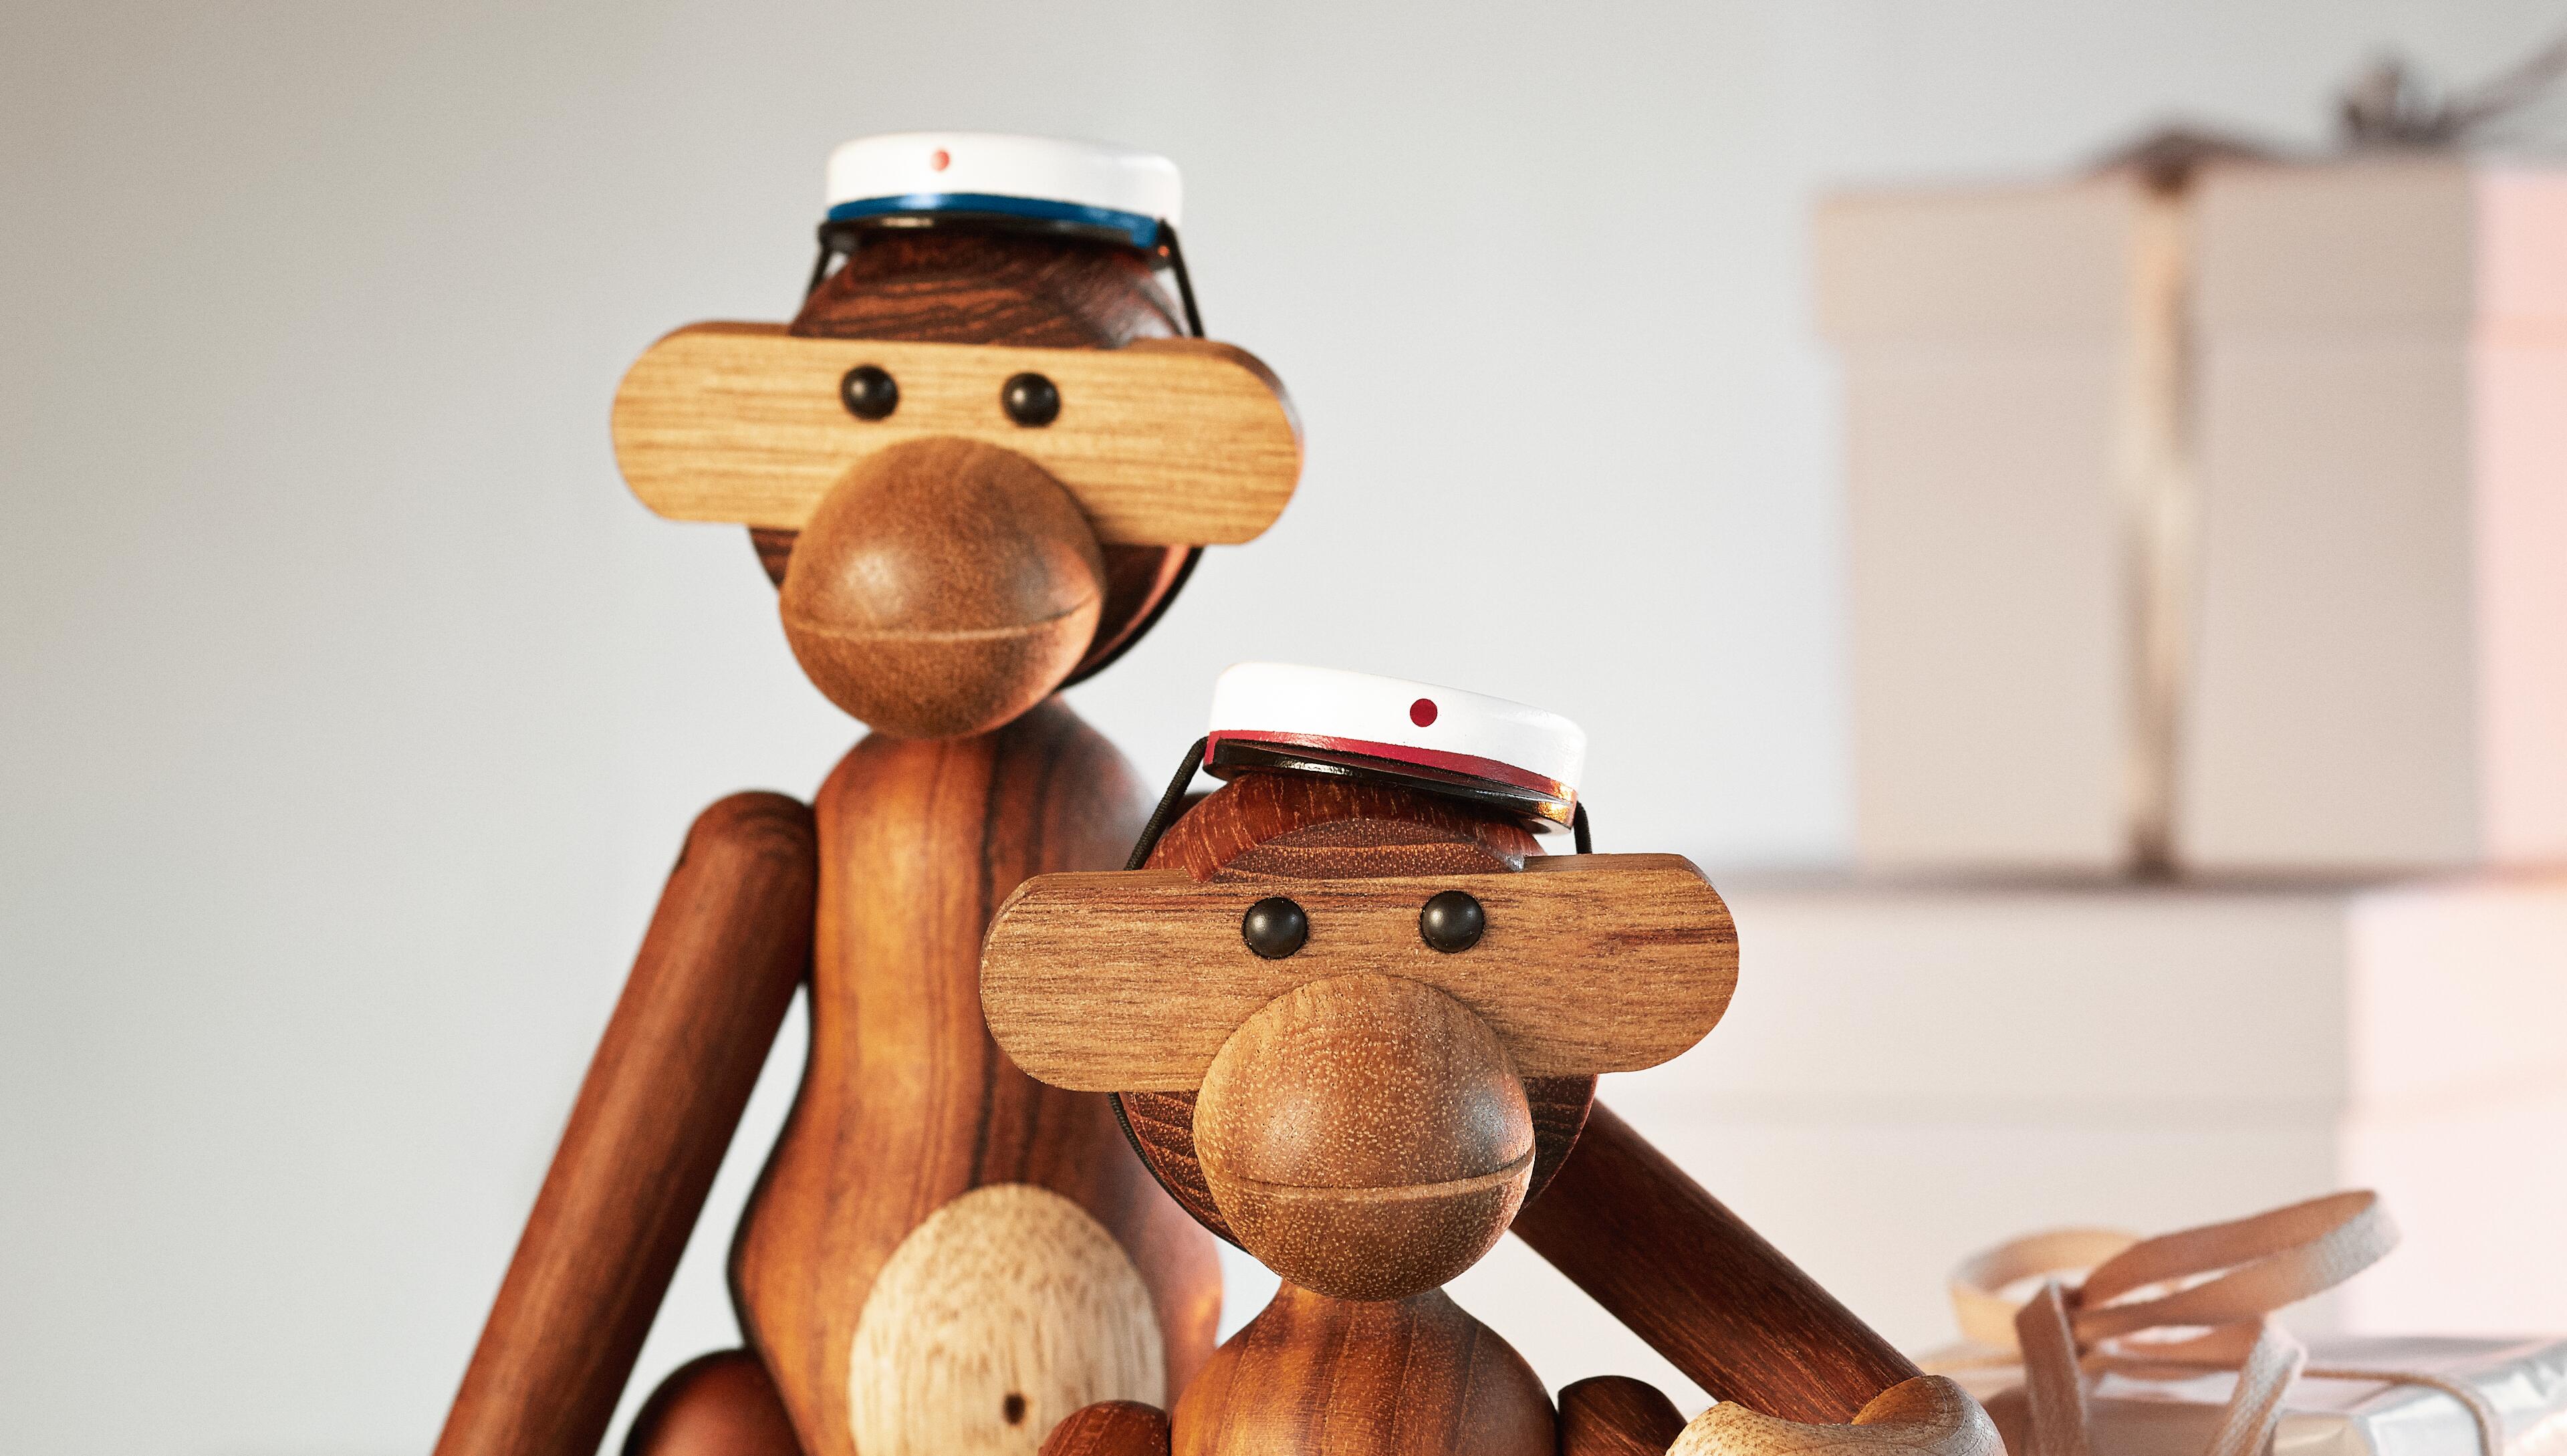 Kay Bojesen monkeys with graduation hat in blue and red. High school graduation gift idea.